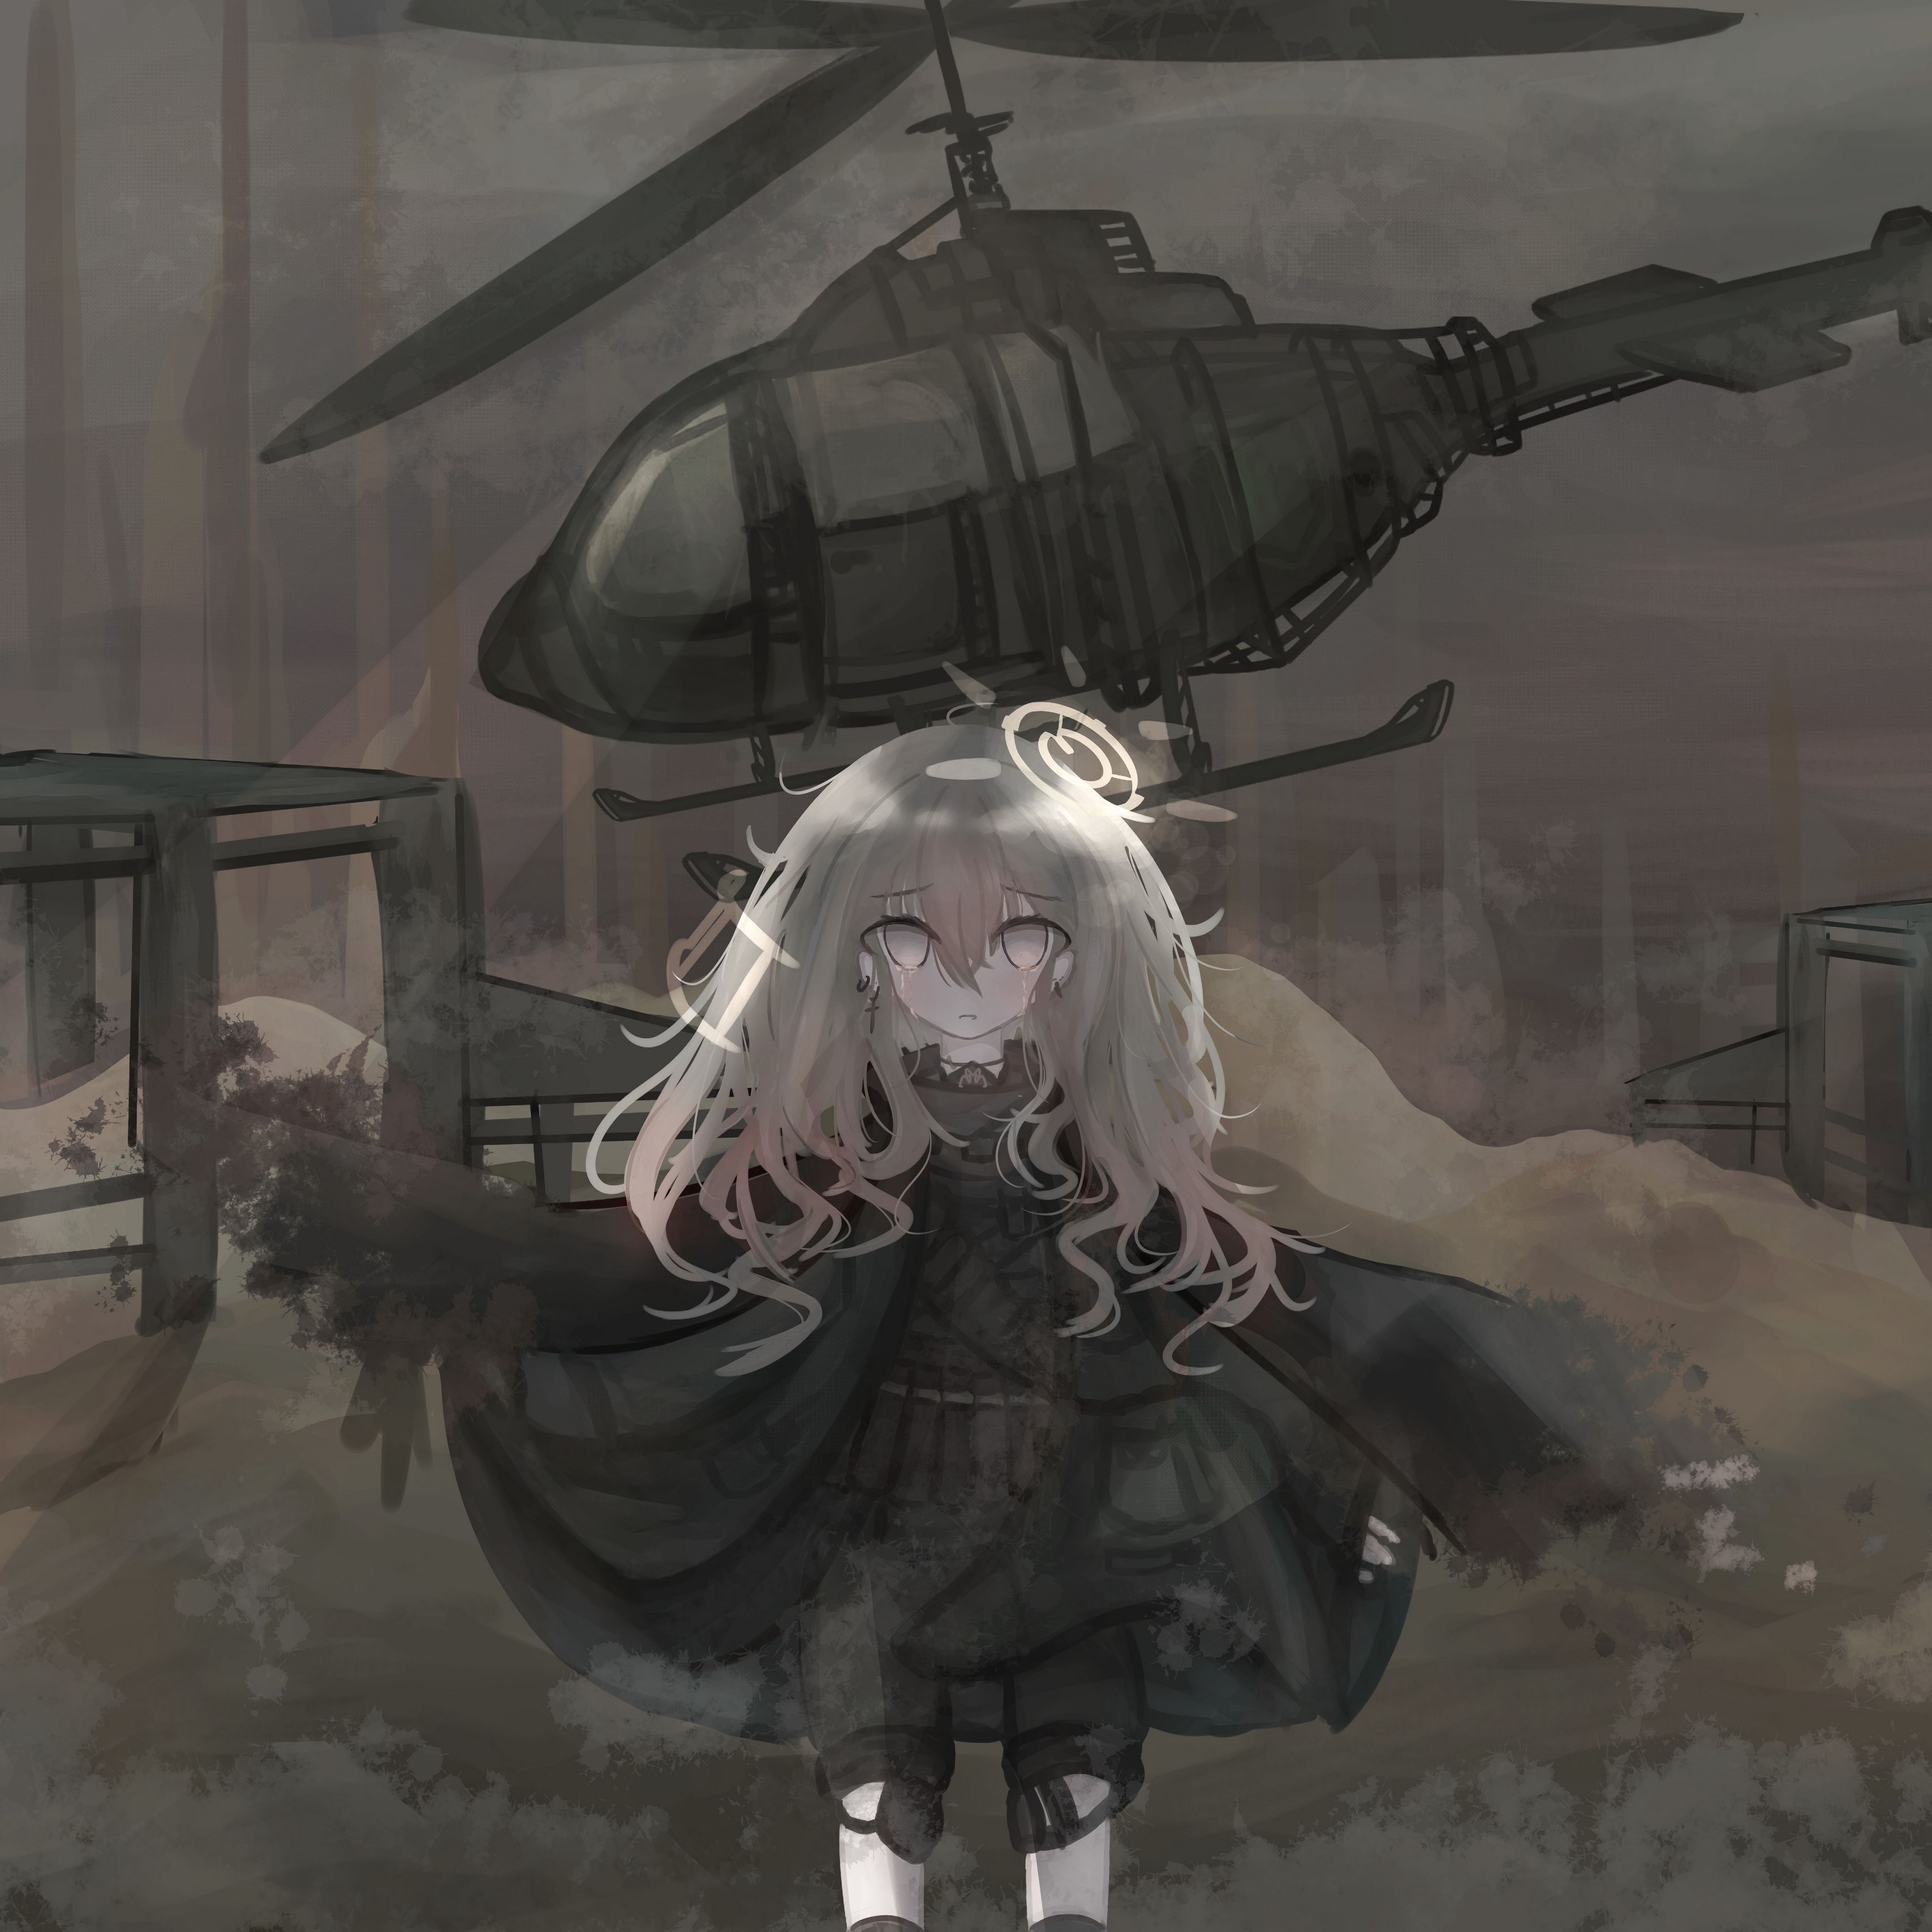 Download wallpaper 3415x3415 girl, alone, tears, helicopter, war, anime  ipad pro 